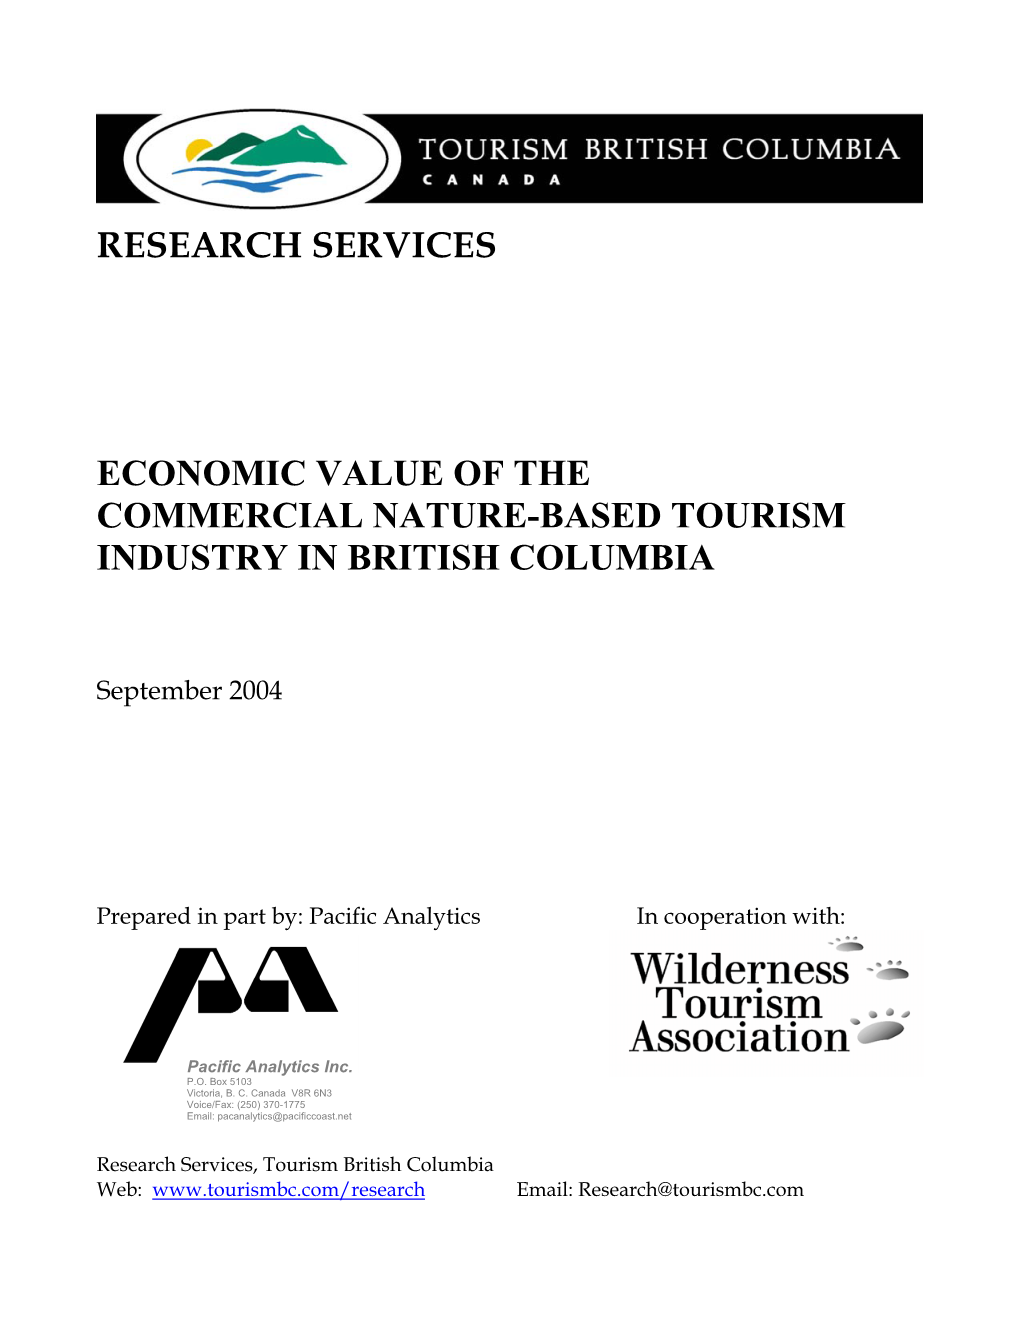 Economic Value of the Commercial Nature-Based Tourism Industry in British Columbia